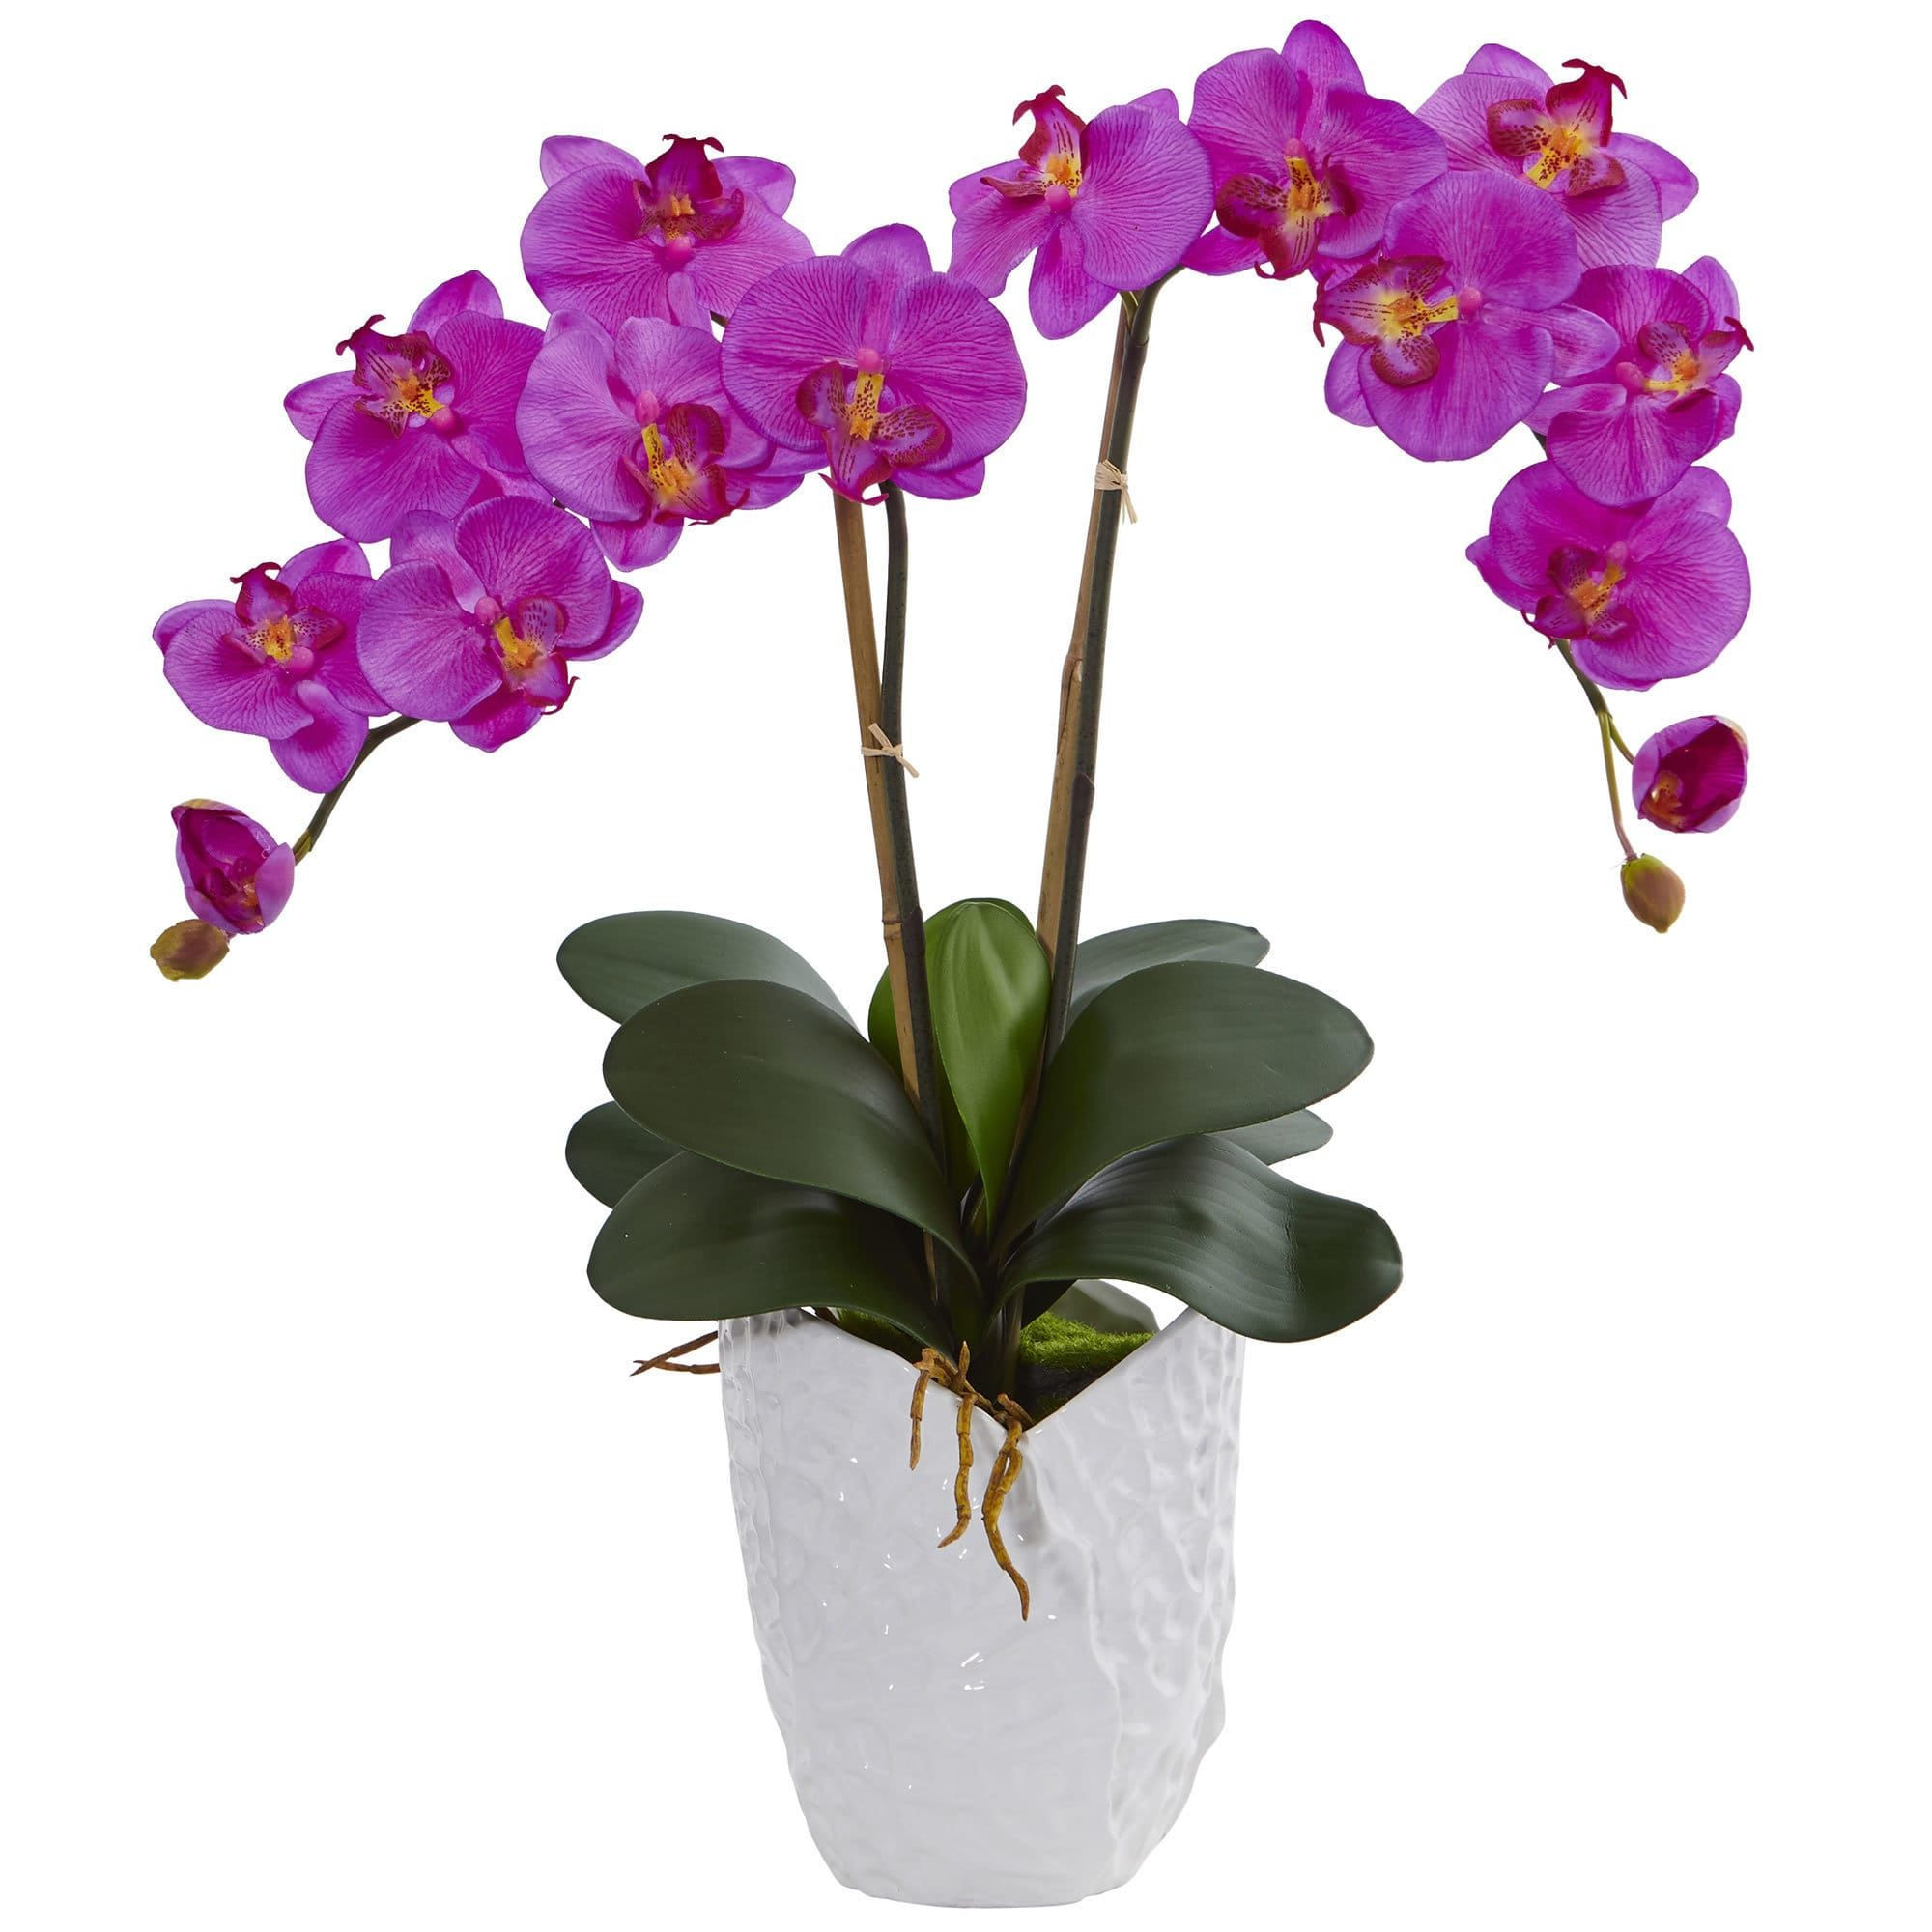 22 Stylish orchid In Glass Vase 2024 free download orchid in glass vase of nearly natural double phalaenopsis orchid artificial arrangement in with nearly natural double phalaenopsis orchid artificial arrangement in white vase purple